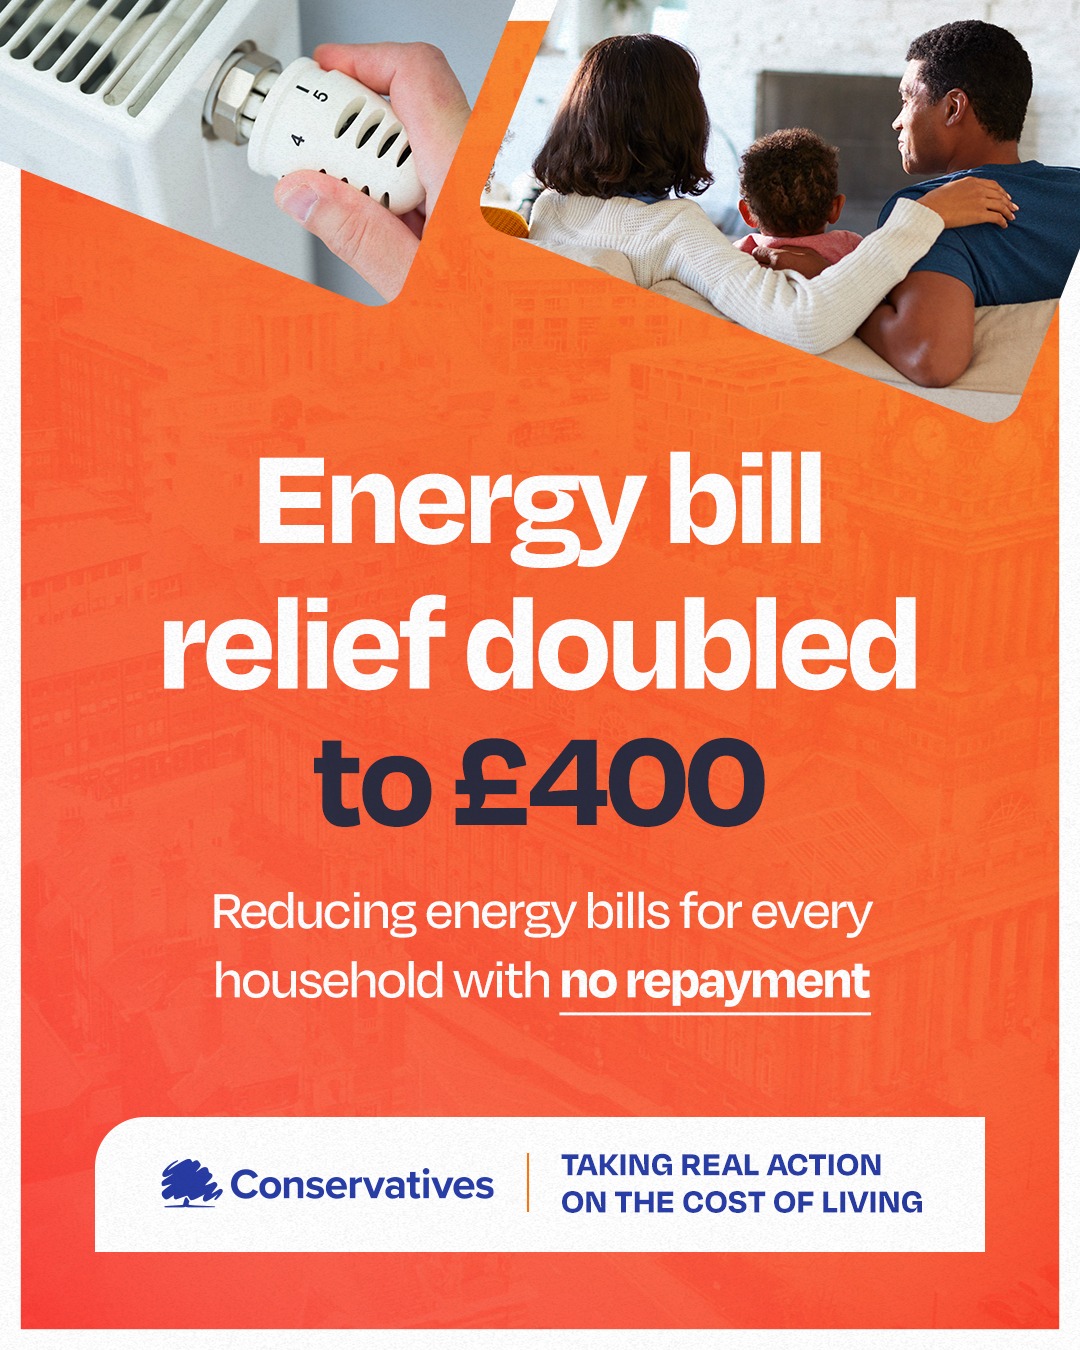 cost-of-living-support-energy-rebate-siobhan-baillie